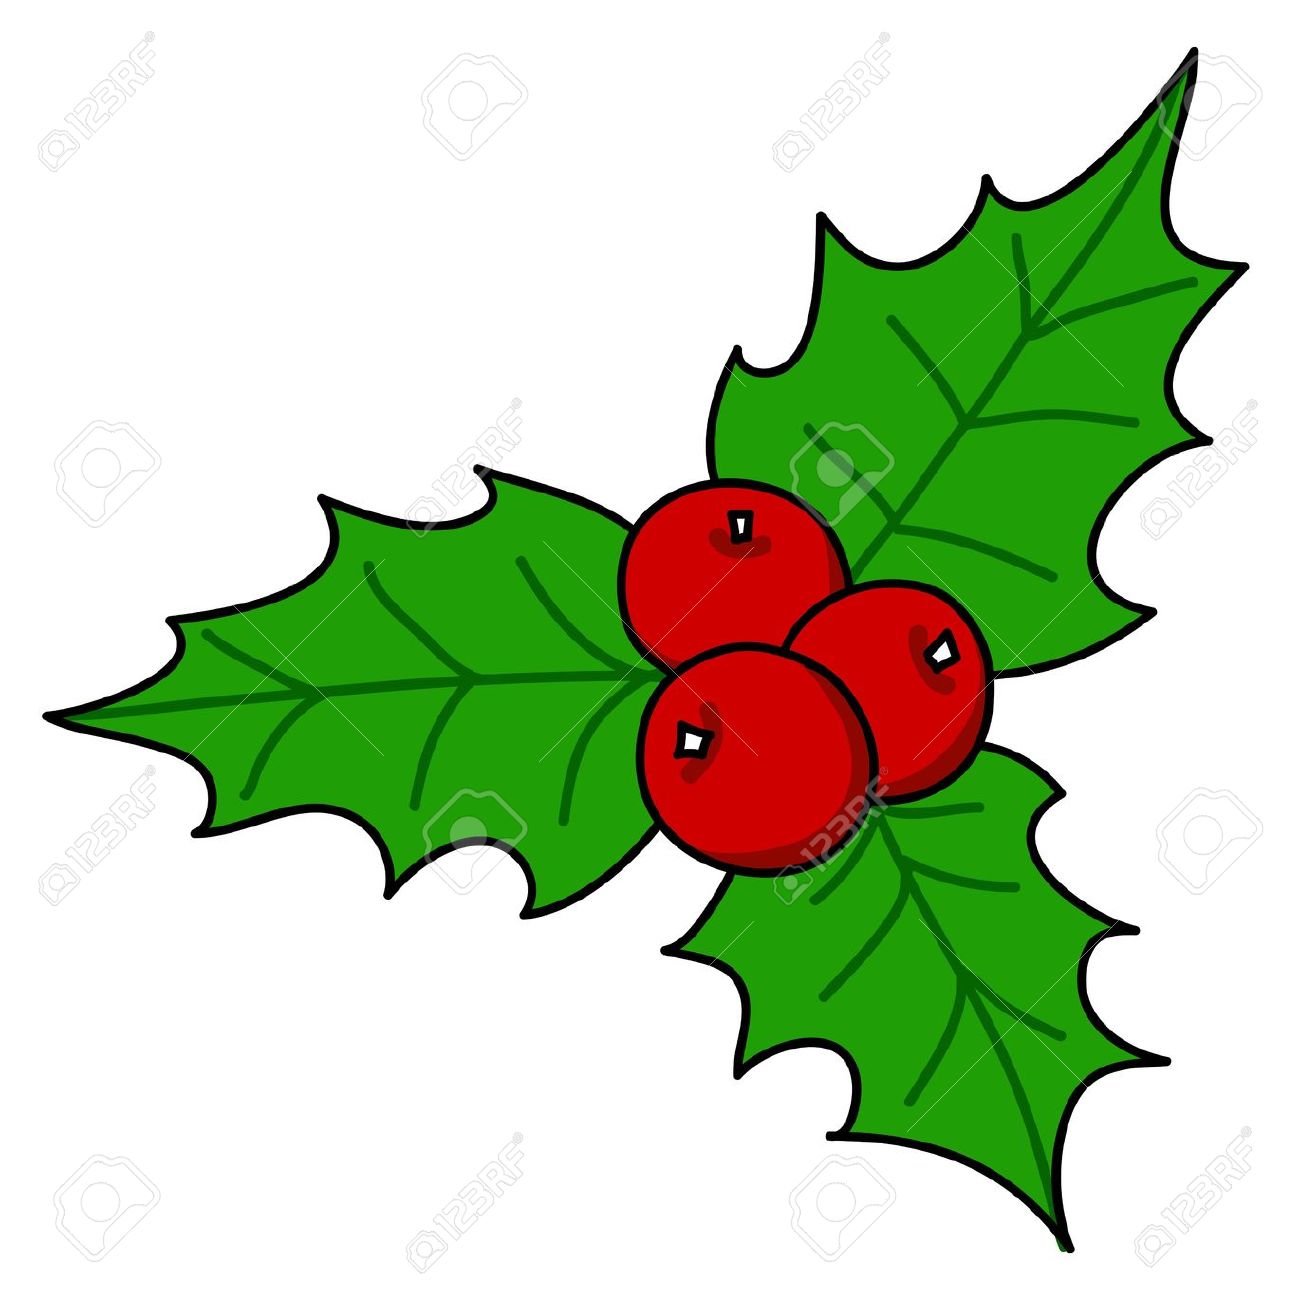 49 holly leaves and berries clip art